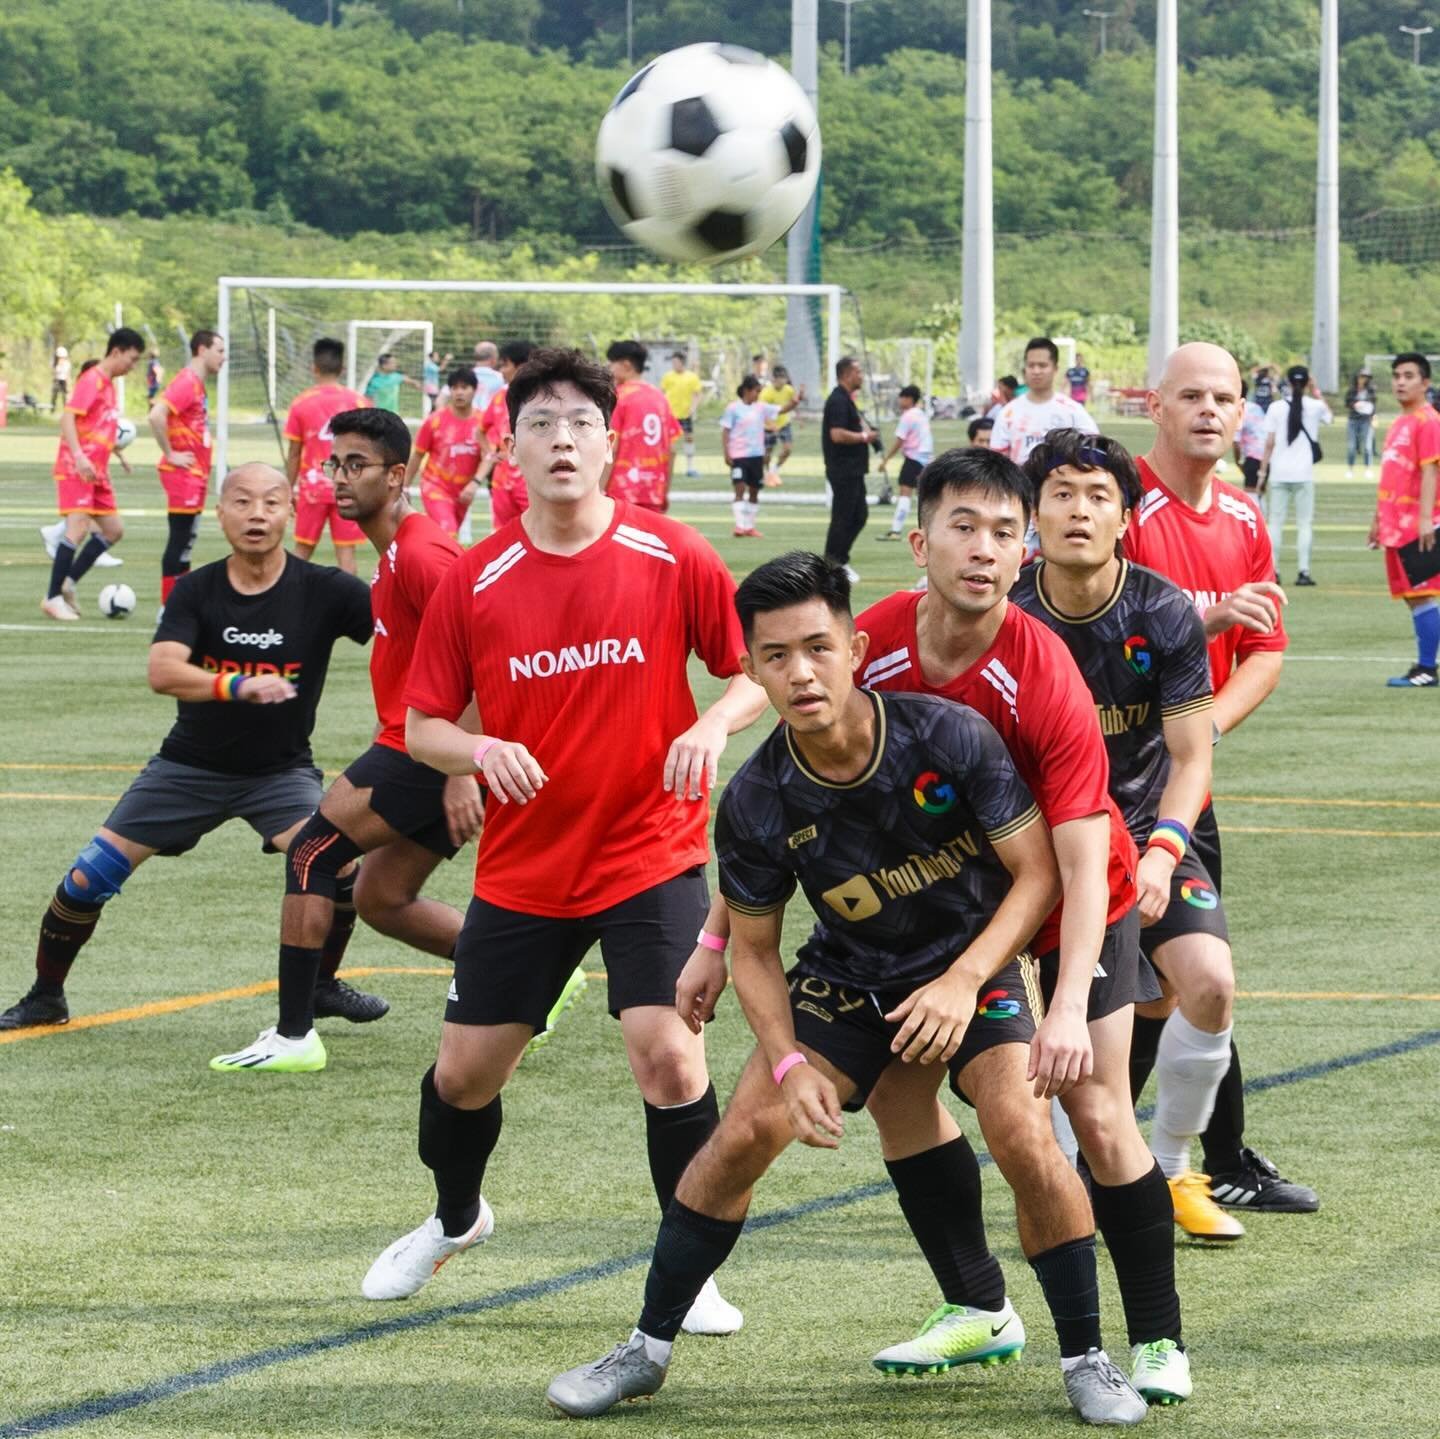 Football 7s took place in both host cities but as these shots from Hong Kong show the energy at the event was electric